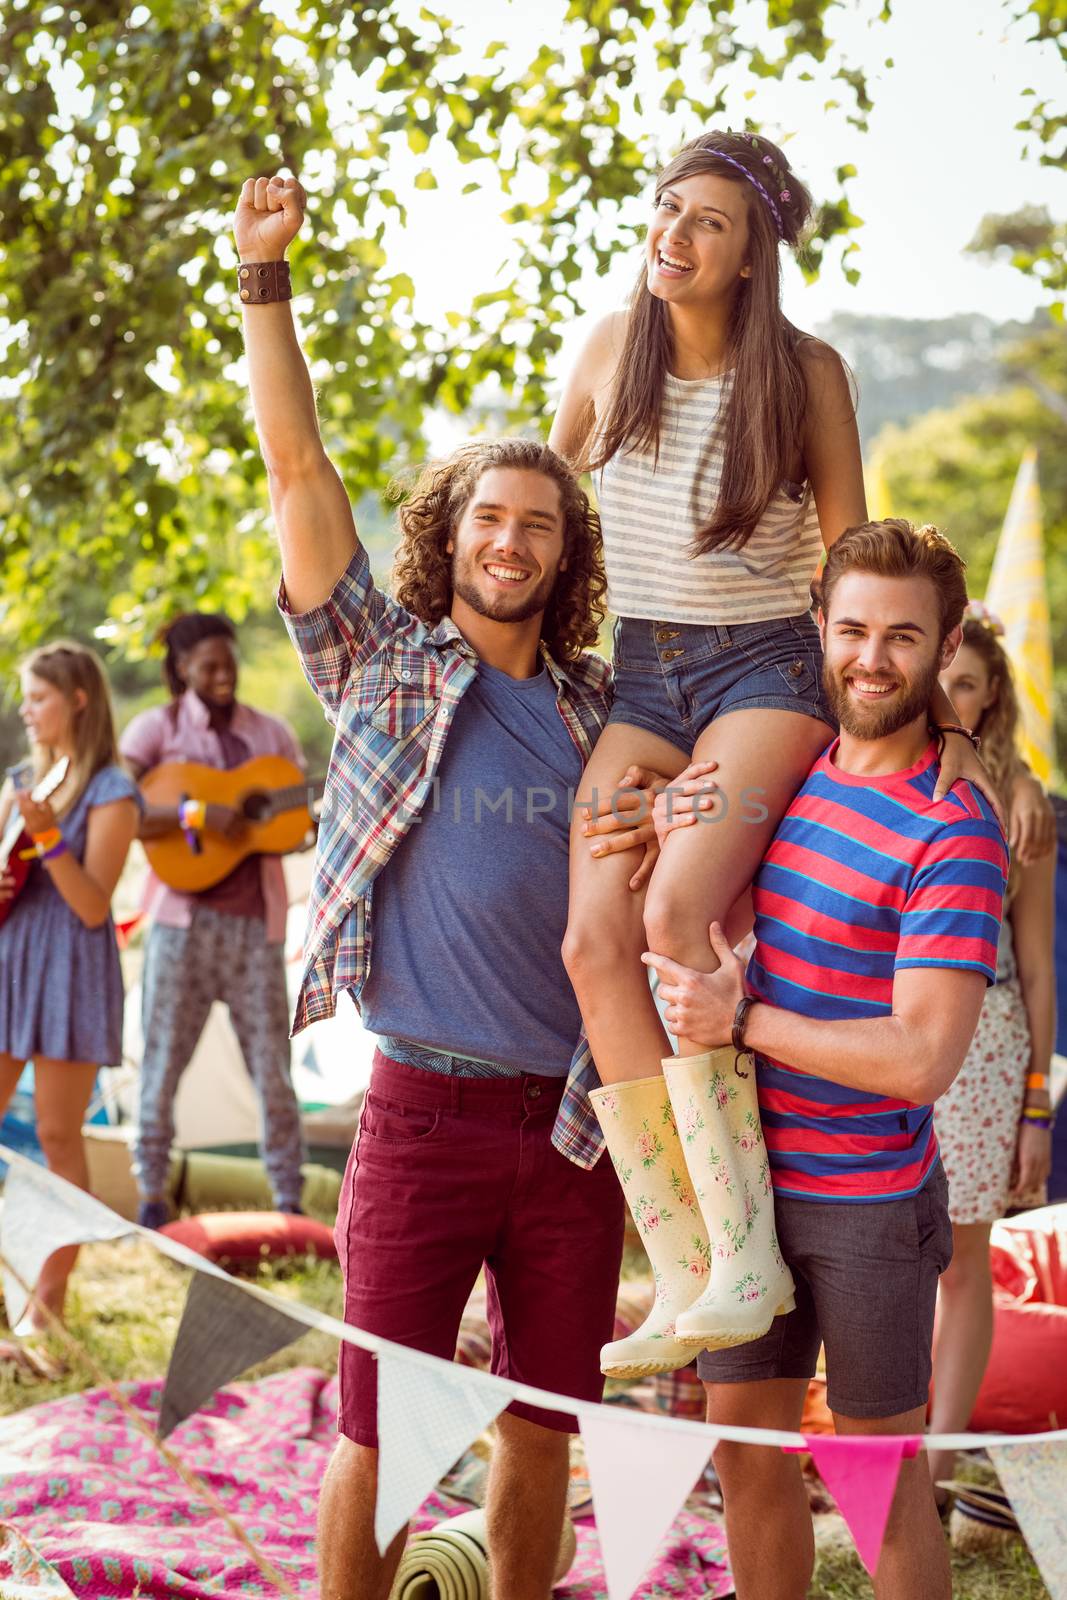 Pretty hipster on friends shoulders at a music festival 